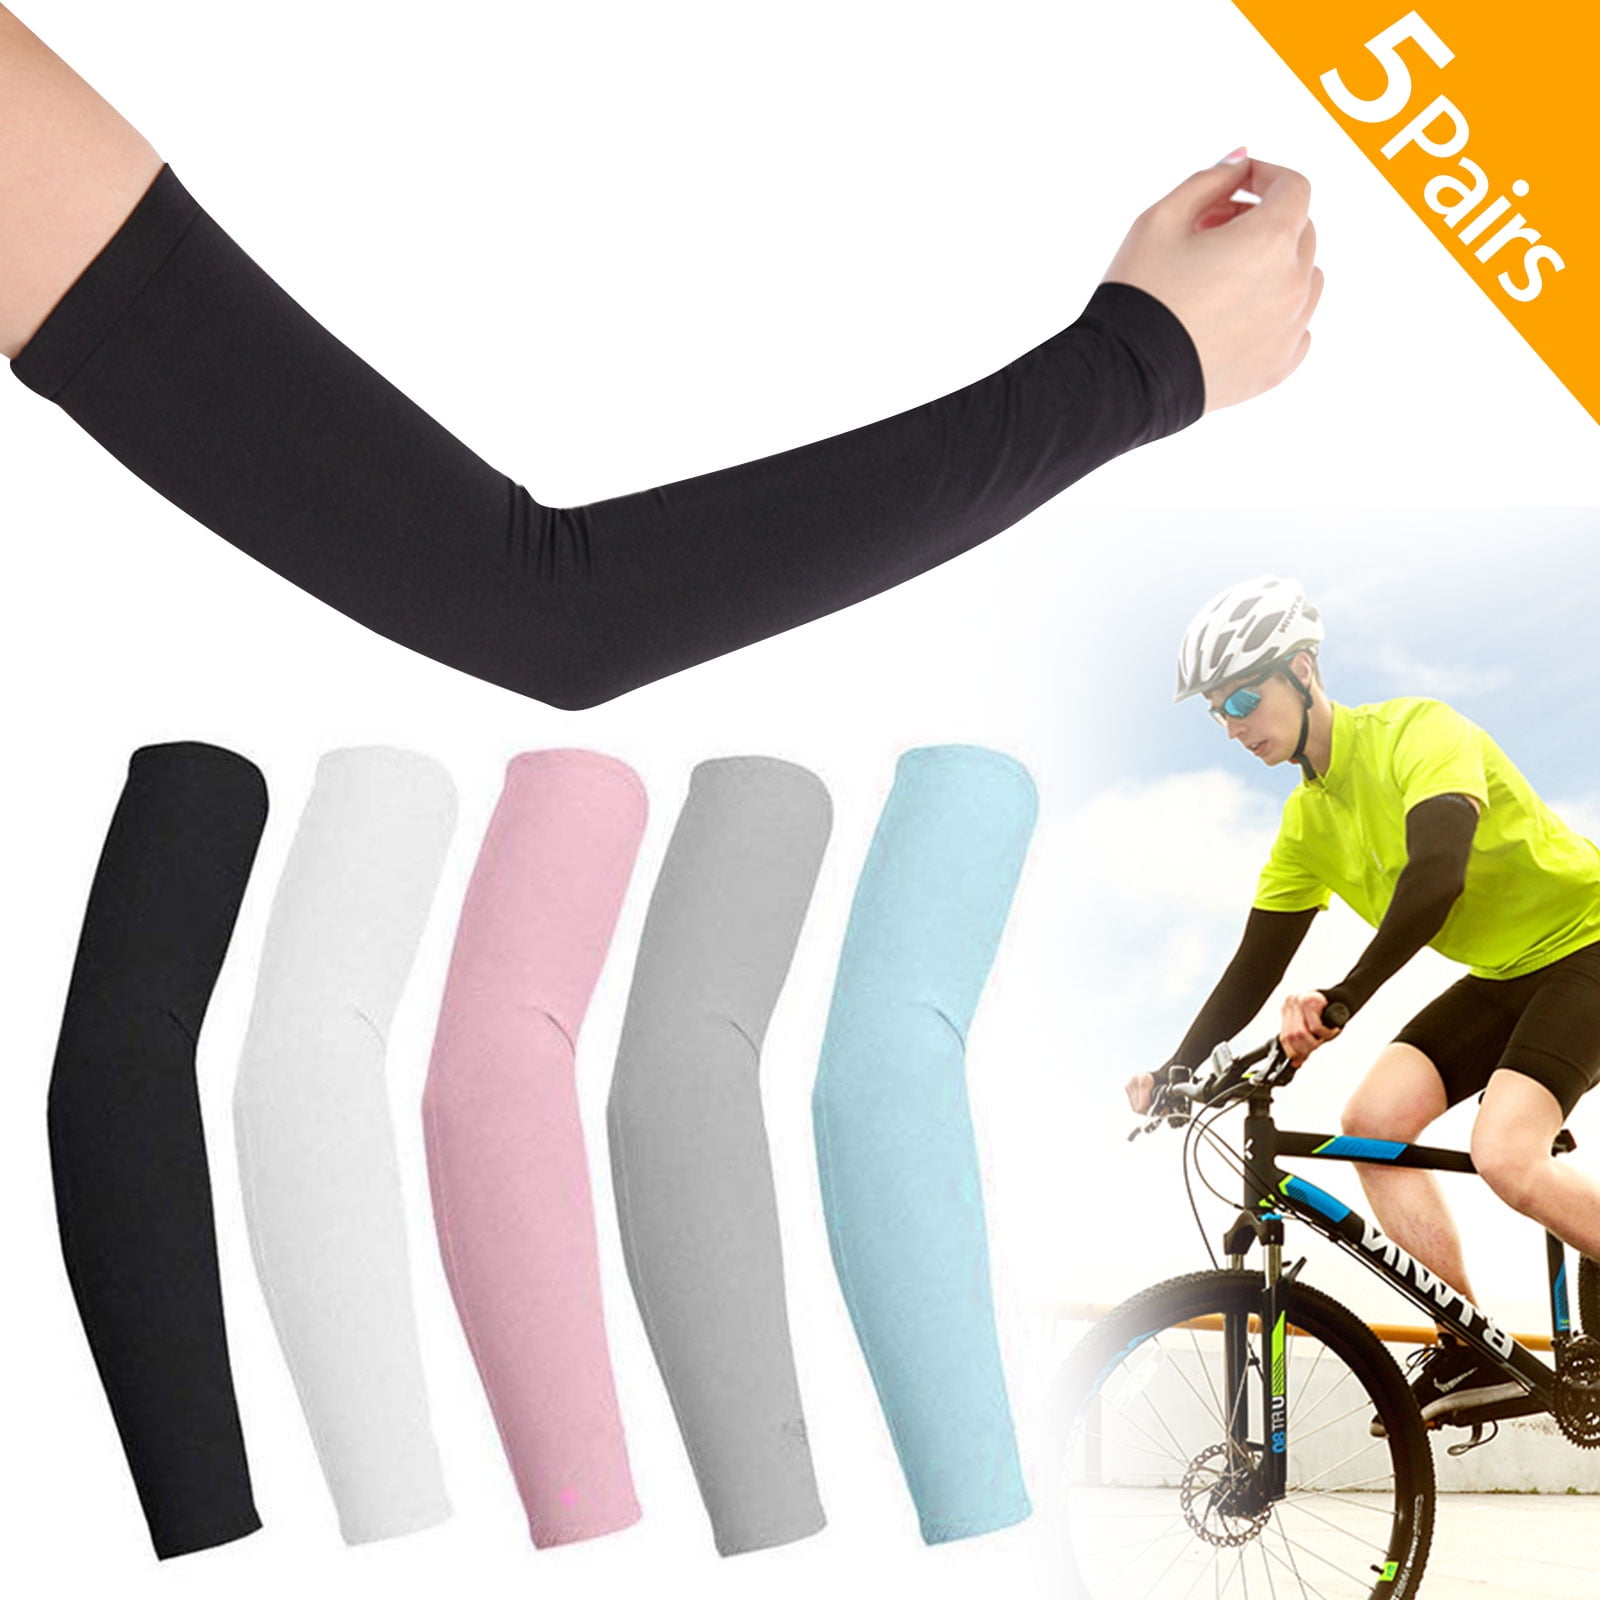 Sport Arm Sleeves Cycling UV Sun Protection Cover For Running Jogging Fishing 